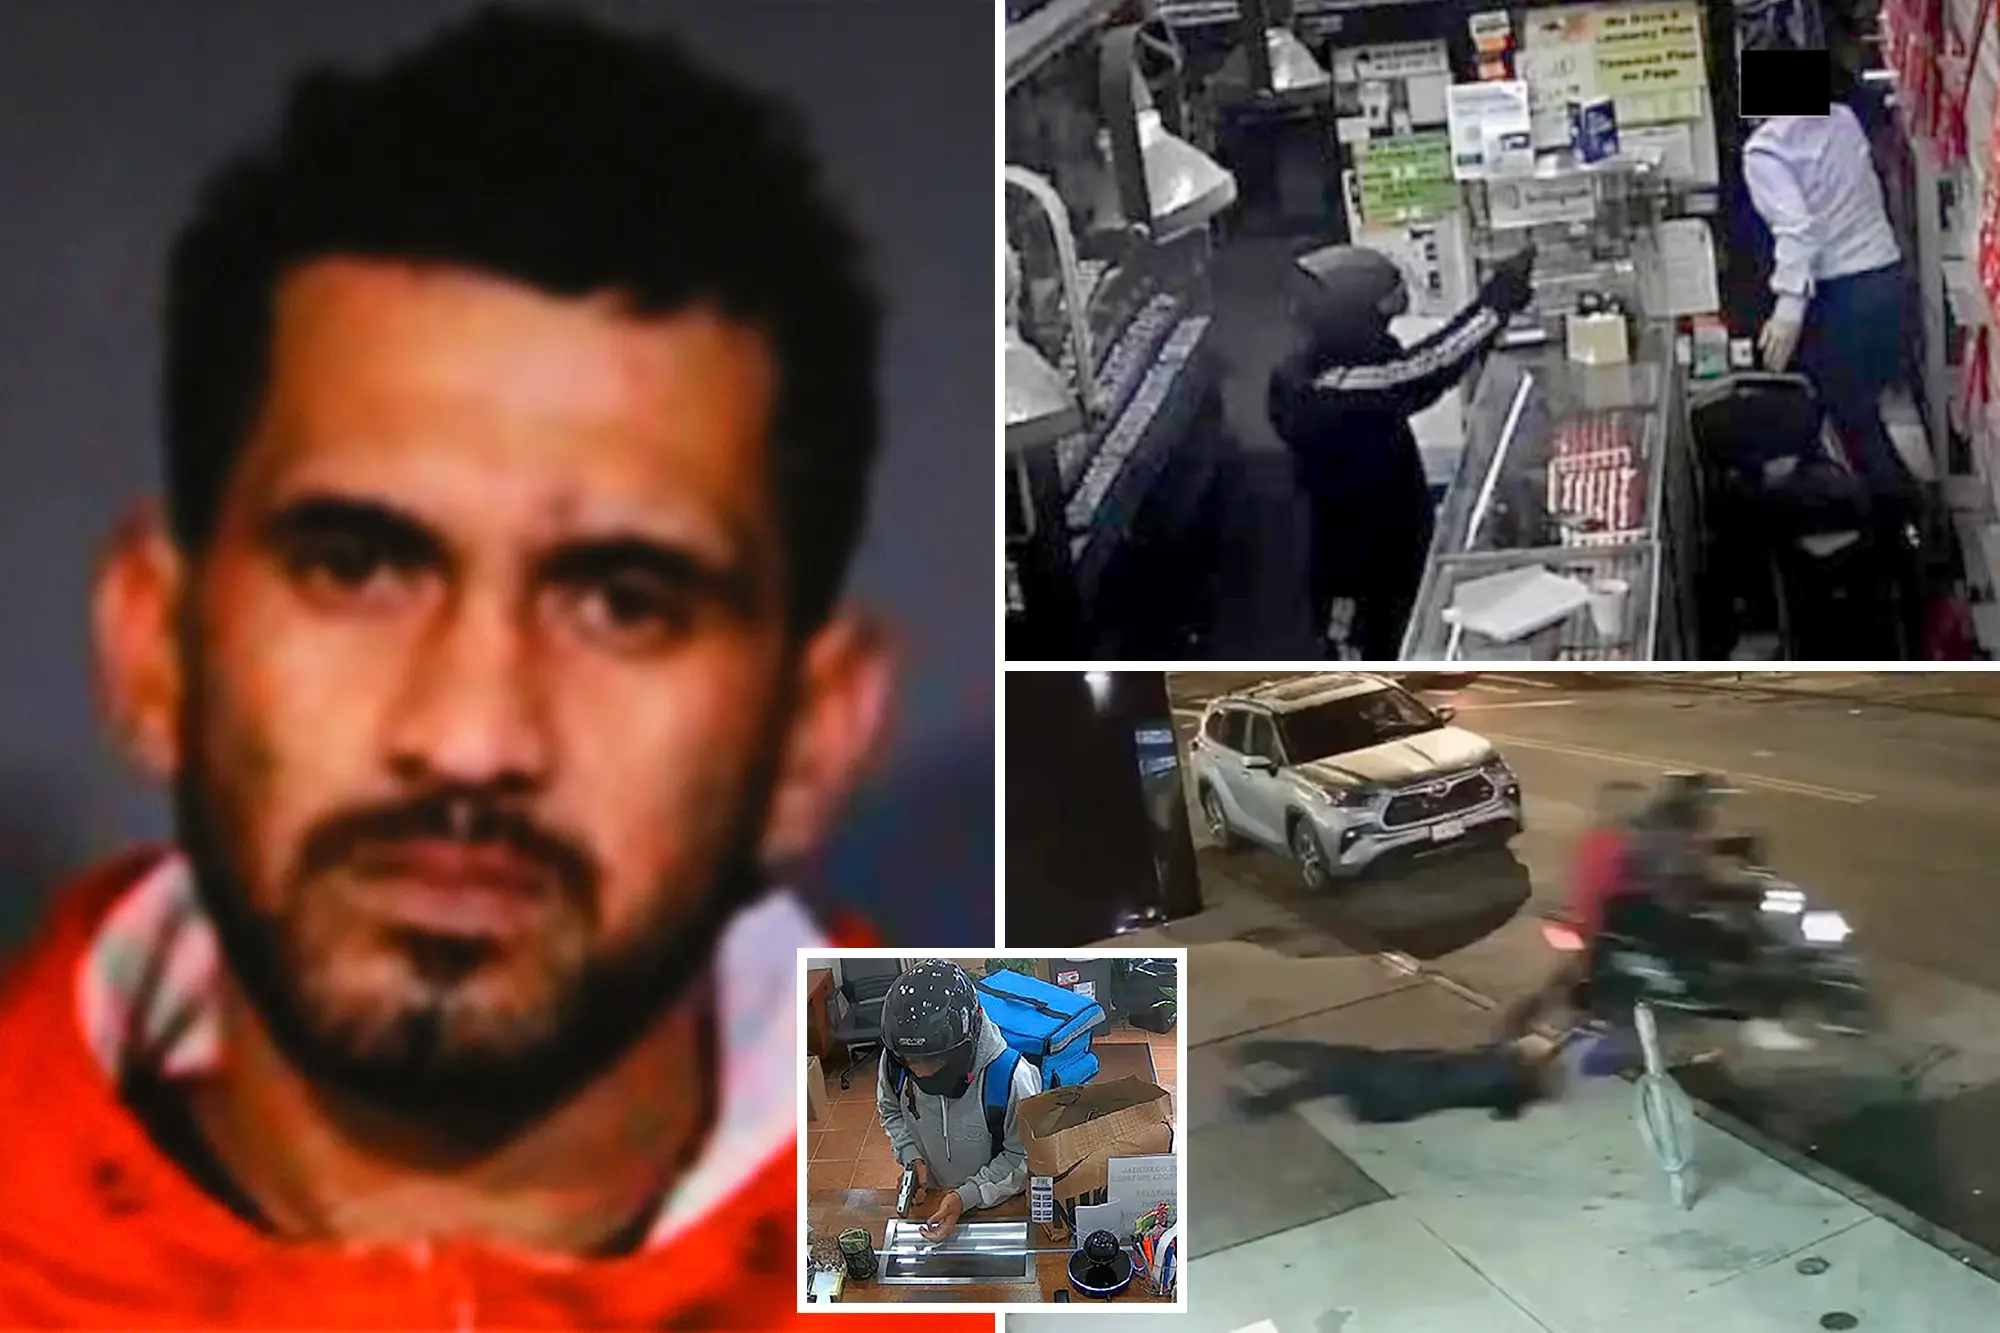 Fugitive Leader of NYC Migrant Moped Gang Apprehended After Three Months on the Run